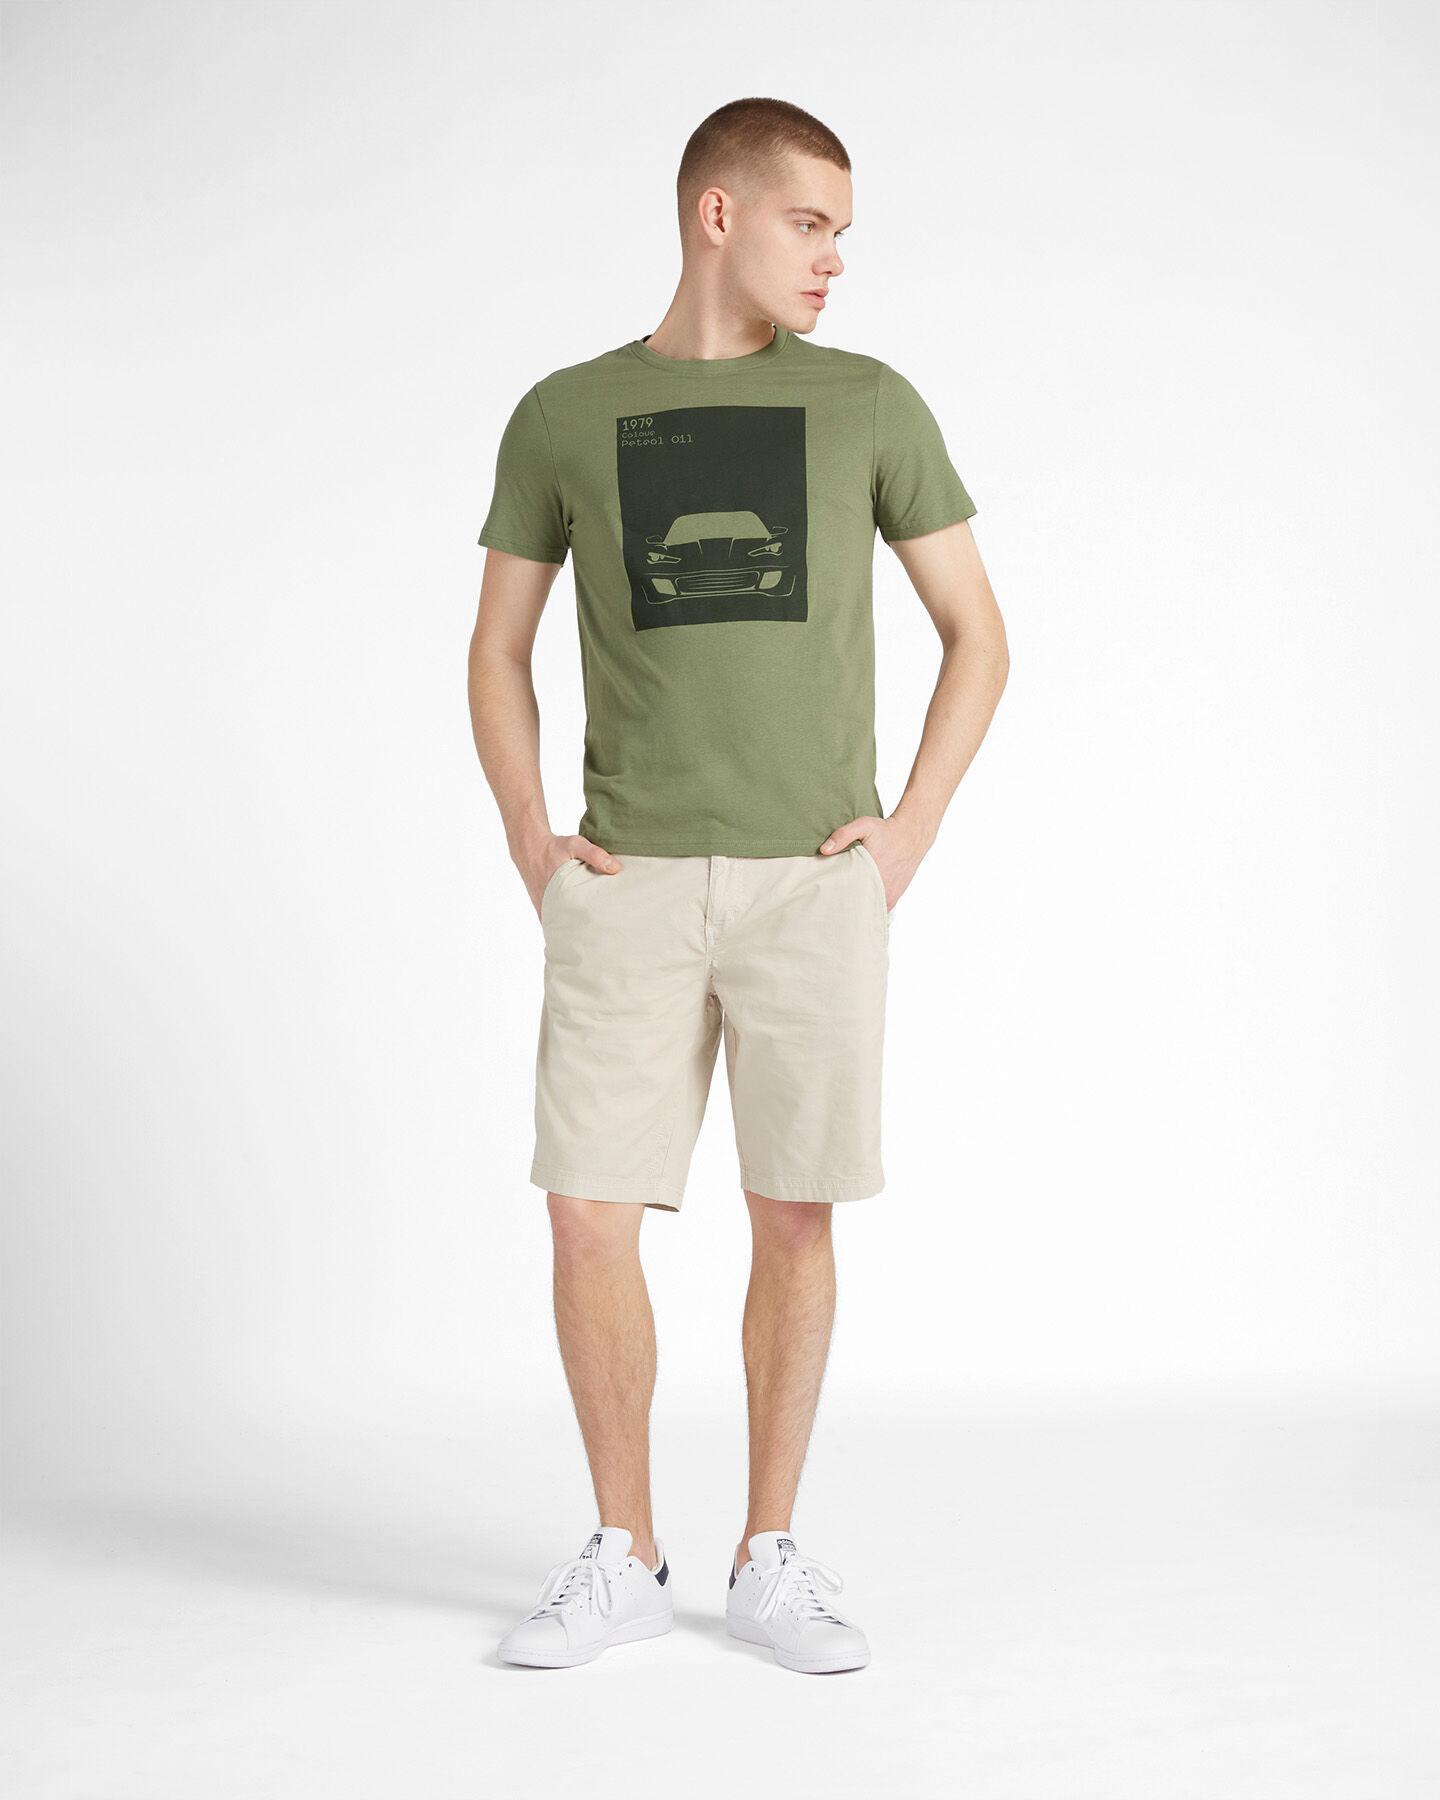  T-Shirt DACK'S BASIC COLLECTION M S4118350|838|S scatto 1